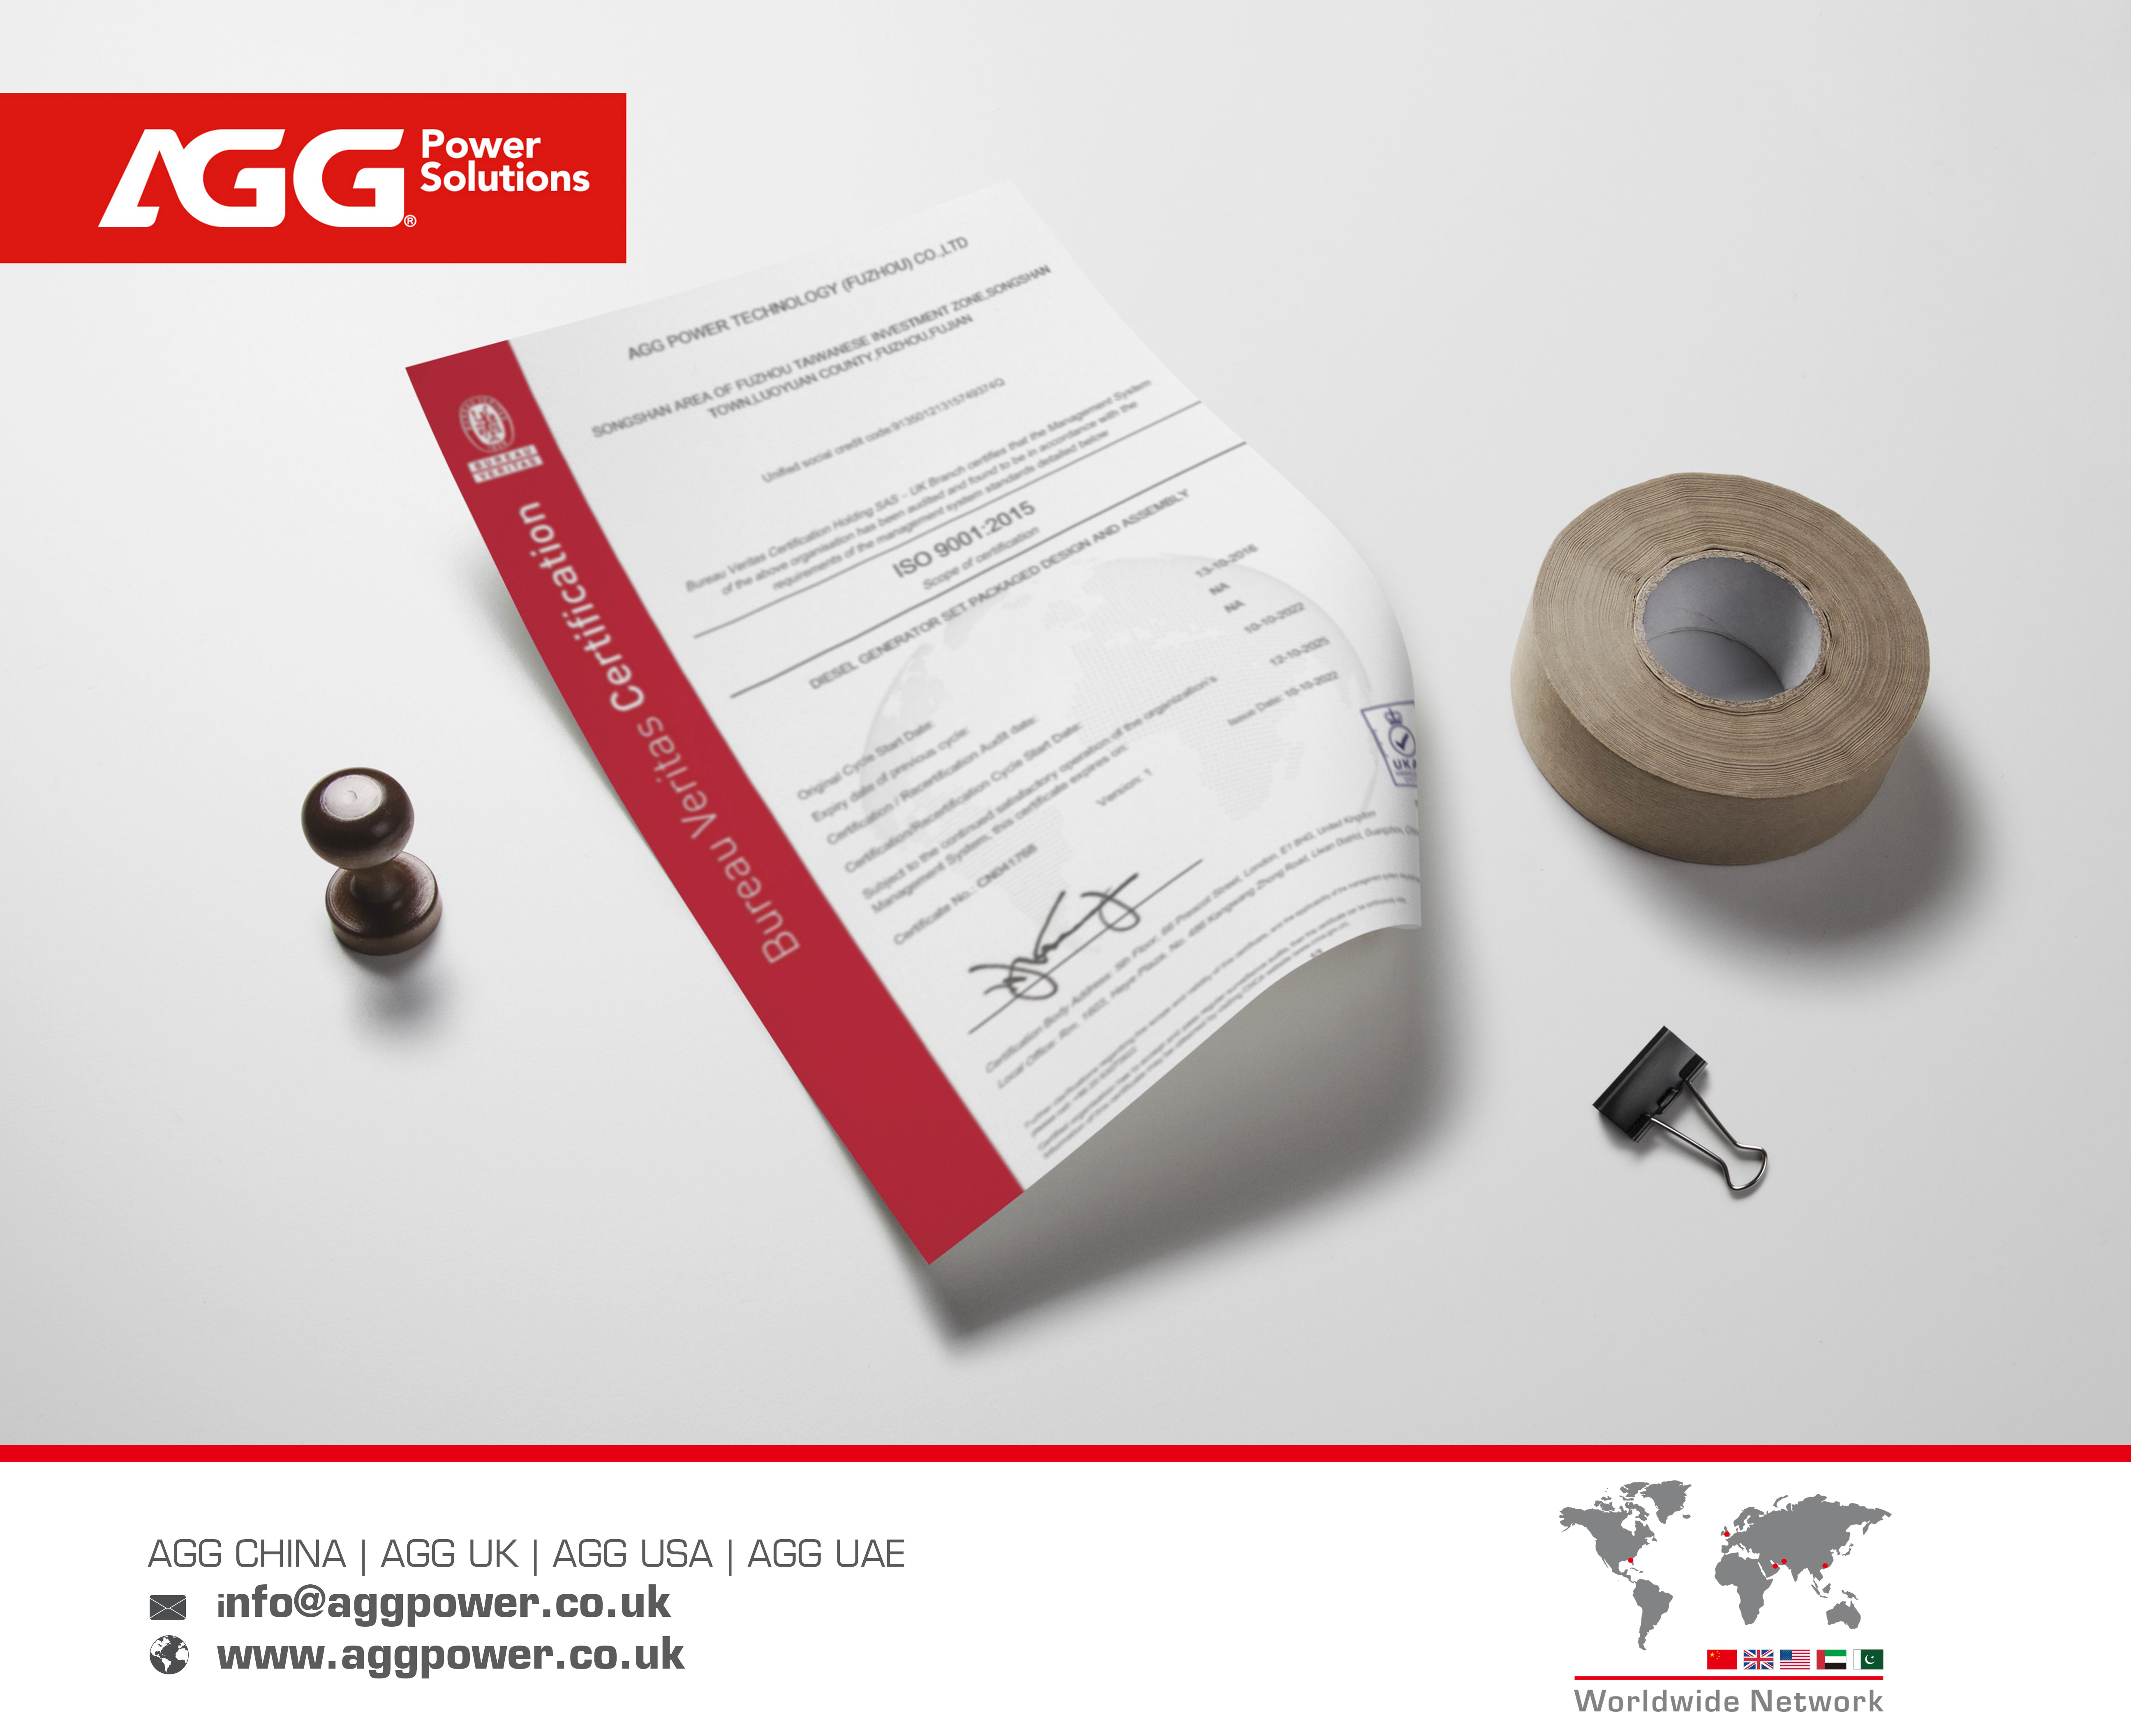 AGG Power Successfully Passed the Surveillance Audit for ISO 9001